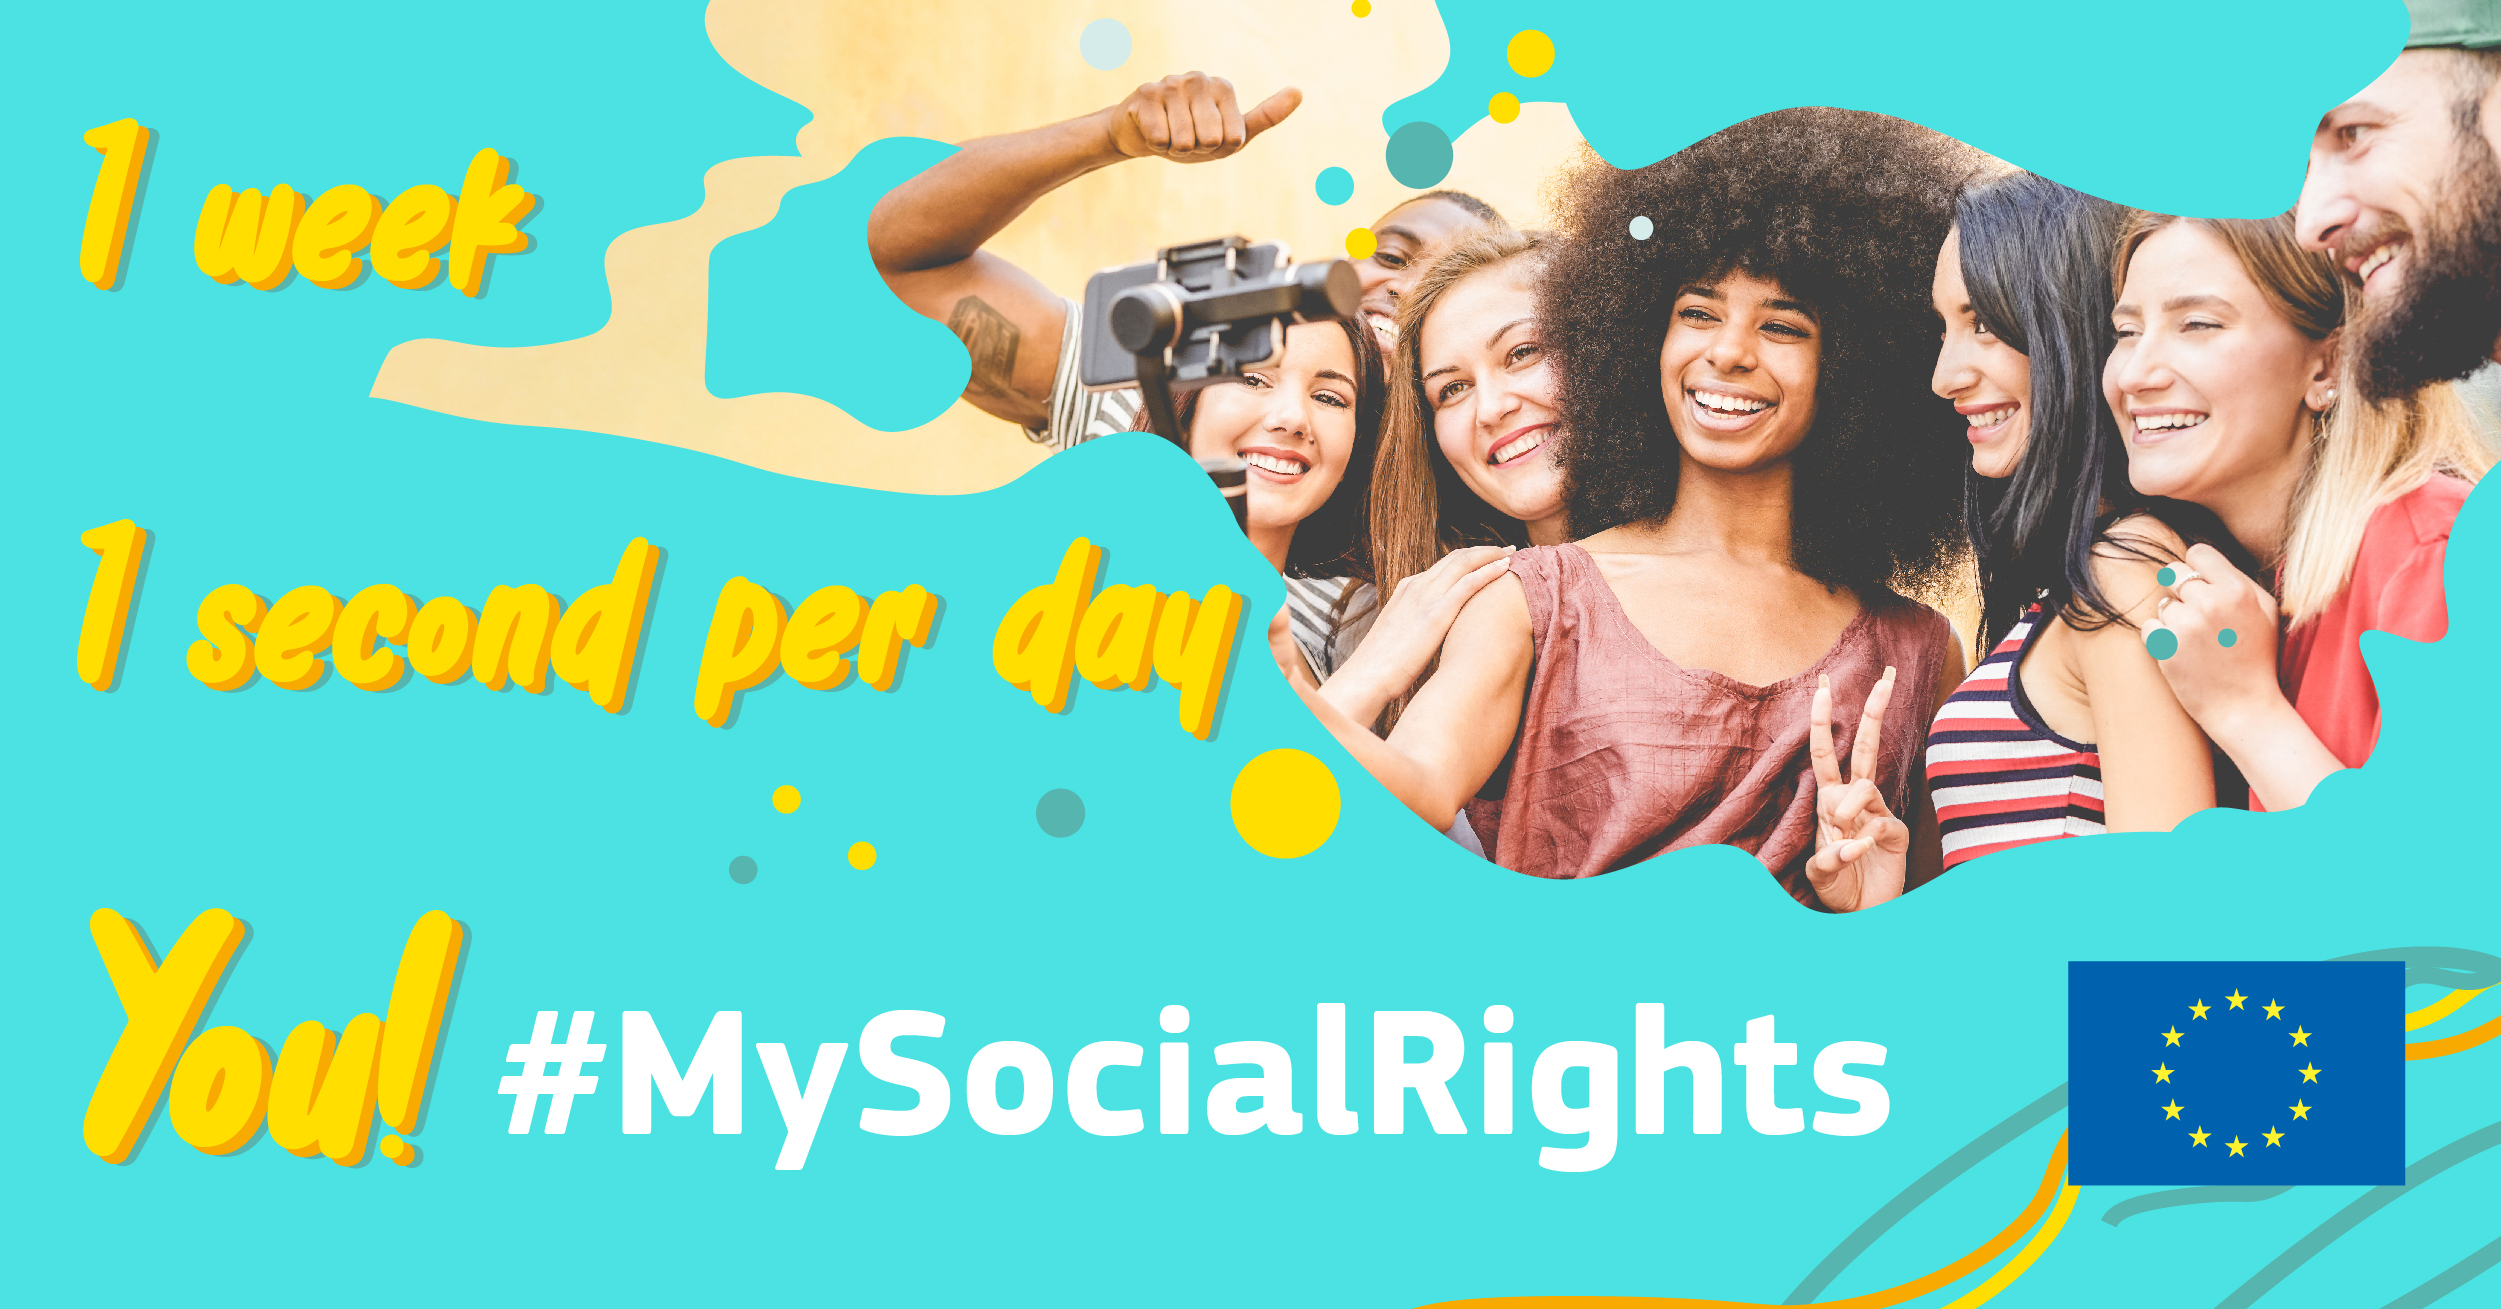 #MySocialRights video competition banner, stating on the legend 